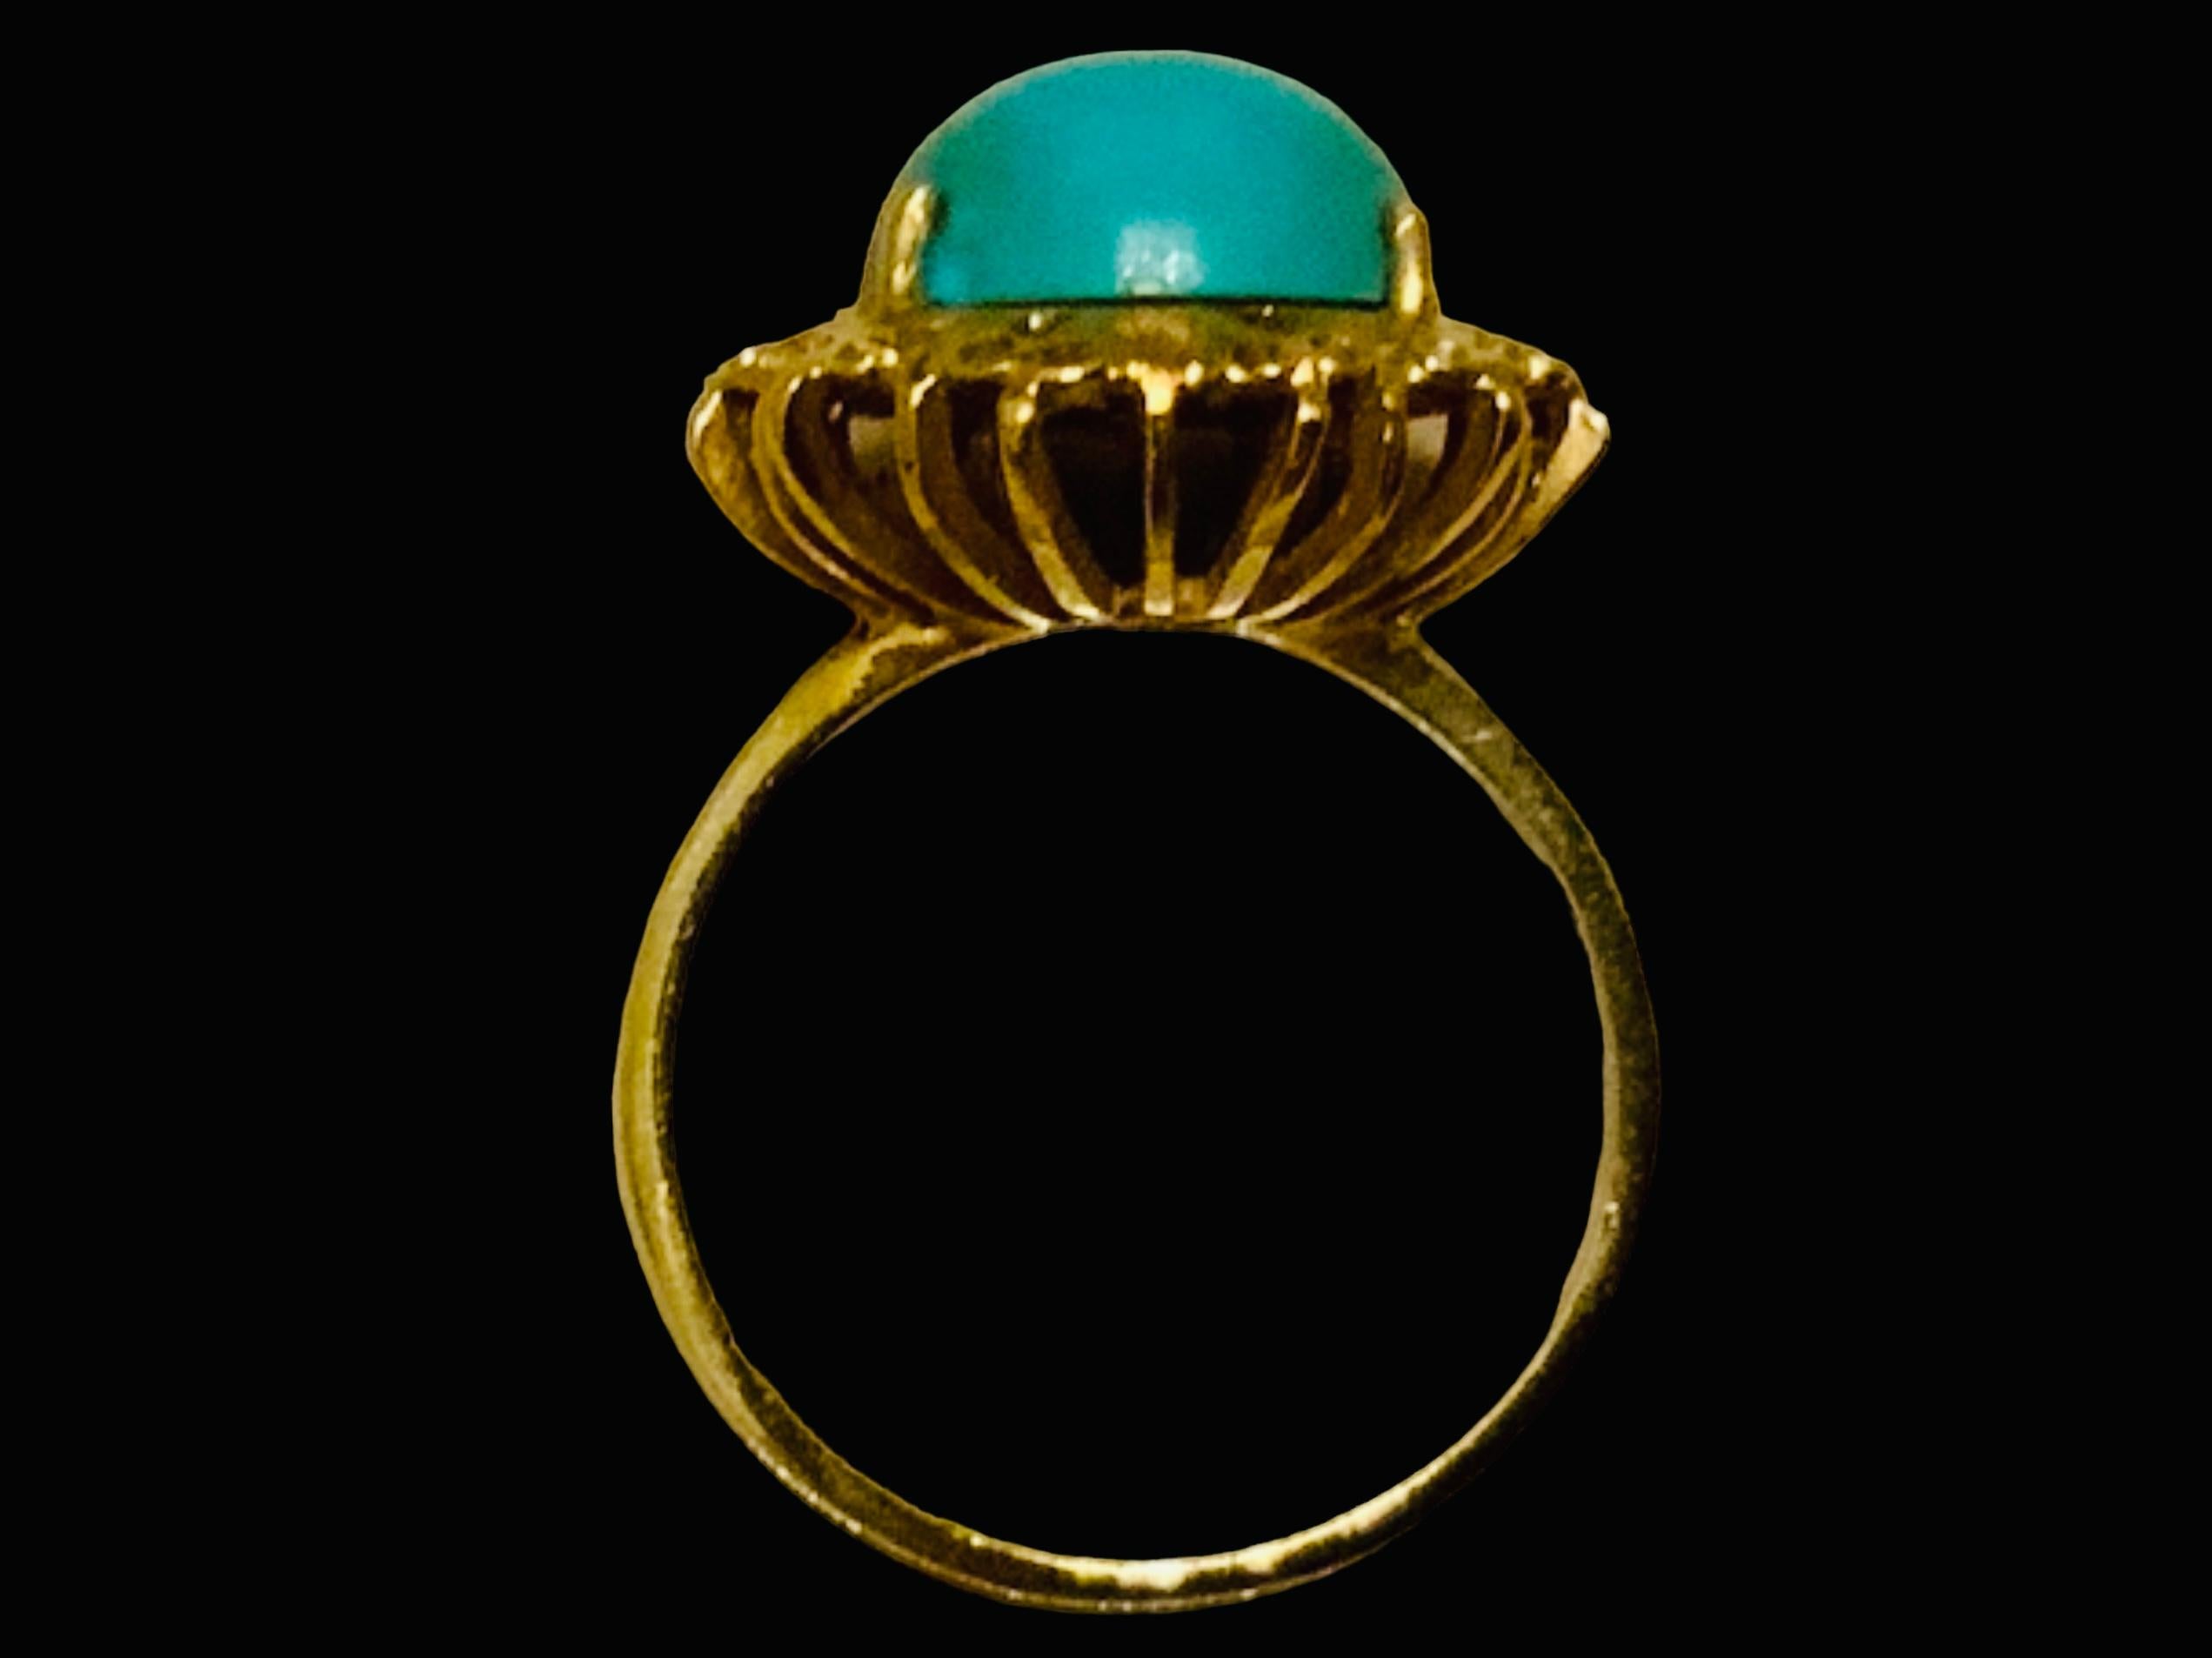 This is an Italian 18K yellow gold and Turquoise cocktail ring. It depicts an elongated oblong shaped cabochon Turquoise stone mounted in gold prong setting and surrounded by a gold wreath made of a garland of tiny bows. The Turquoise’s width and